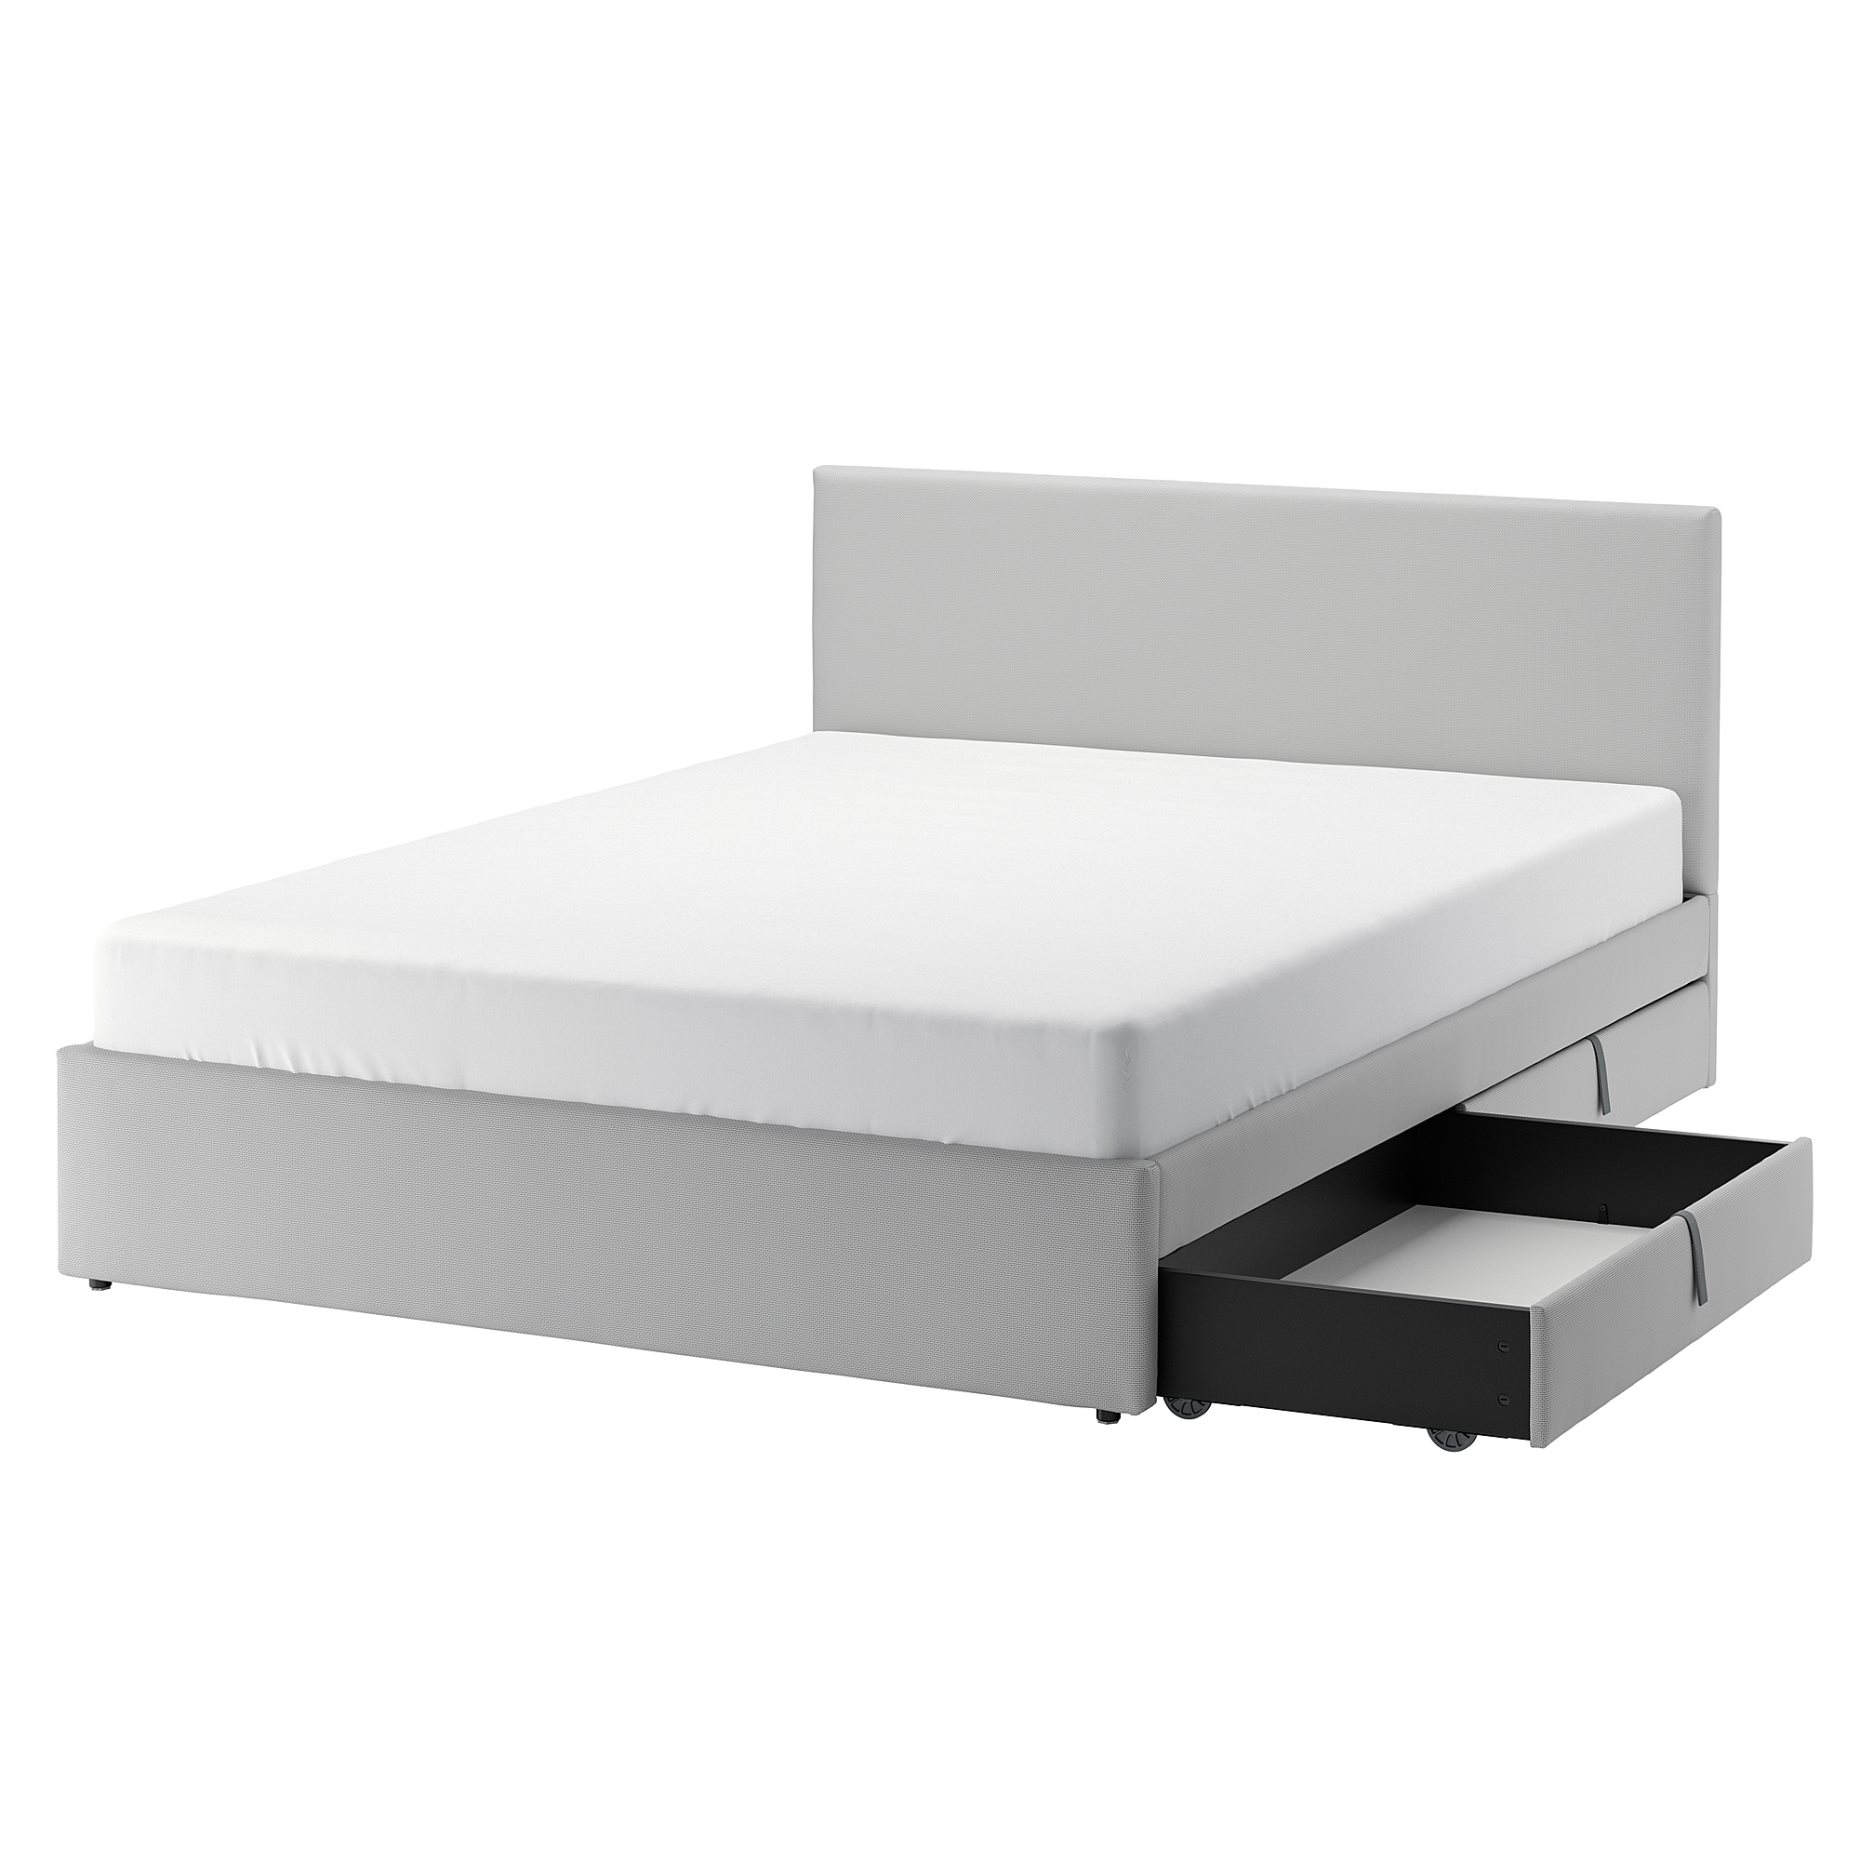 GLADSTAD, upholstered bed with 4 storage boxes, 160x200 cm, 594.070.12